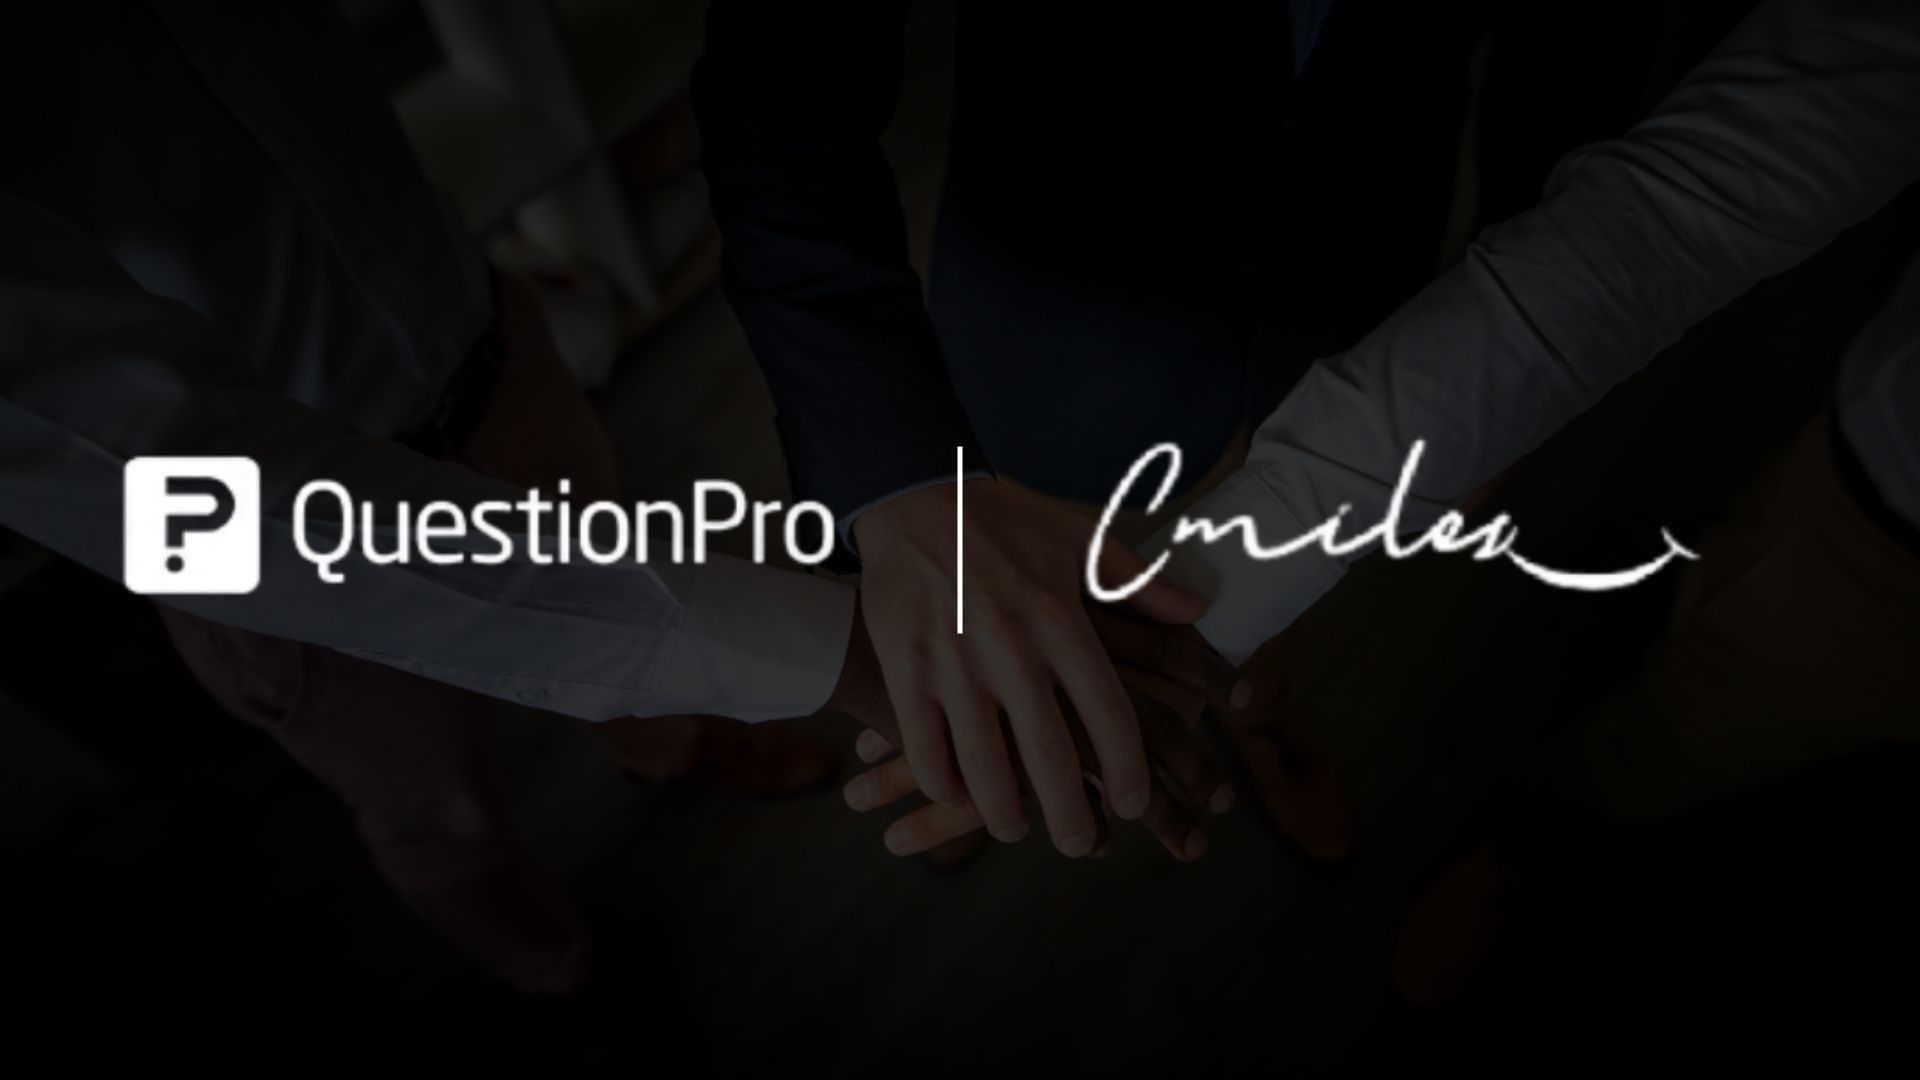 QuestionPro Acquires Cmiles CX to Enhance Omni-Channel Customer Experience